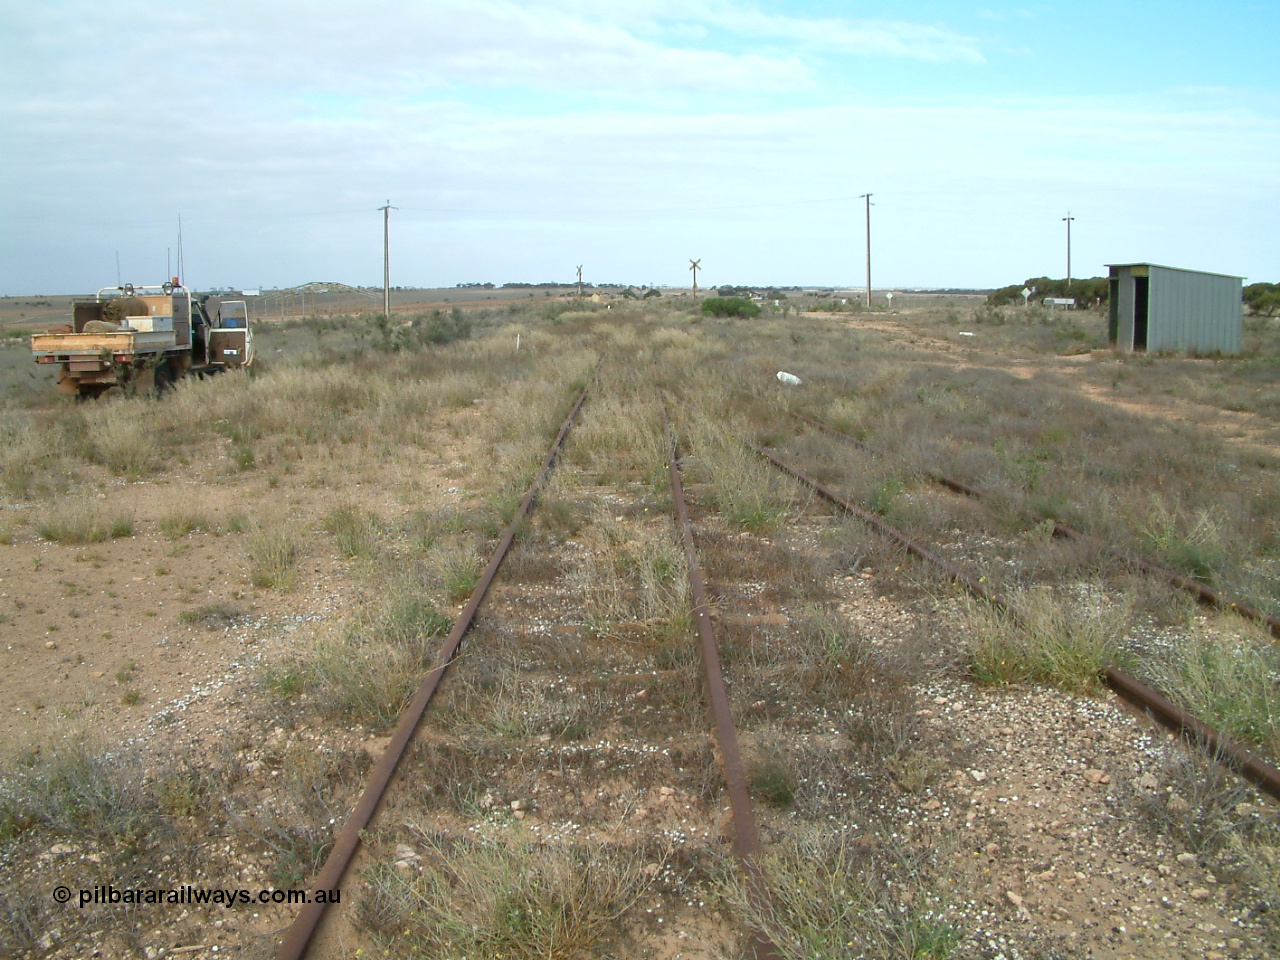 030414 154350
Penong, 505.6 km looking east with the goods loop coming in on the right to join the mainline. The car is on the grain loop. Station shelter on the right is where the original barracks were located.
